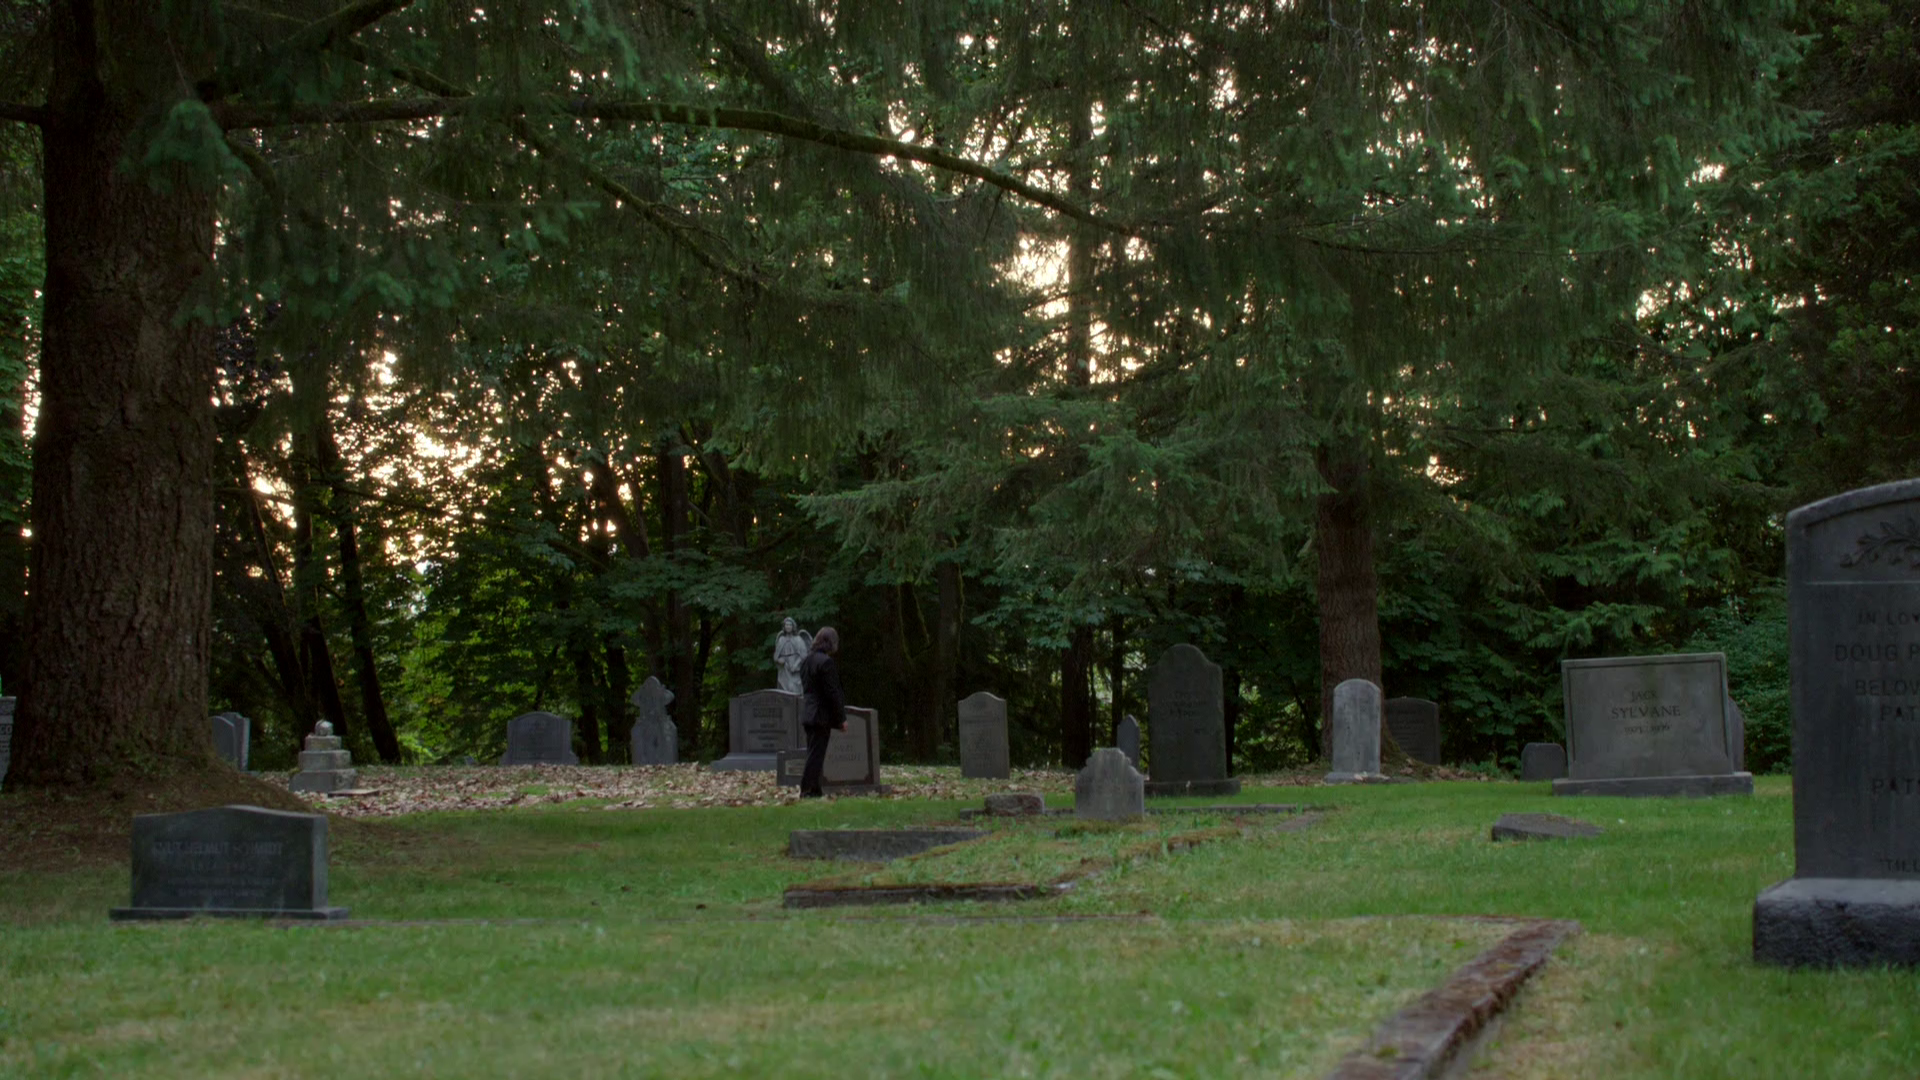 Storybrooke Graveyard | Once Upon a Time Wiki | FANDOM powered by Wikia